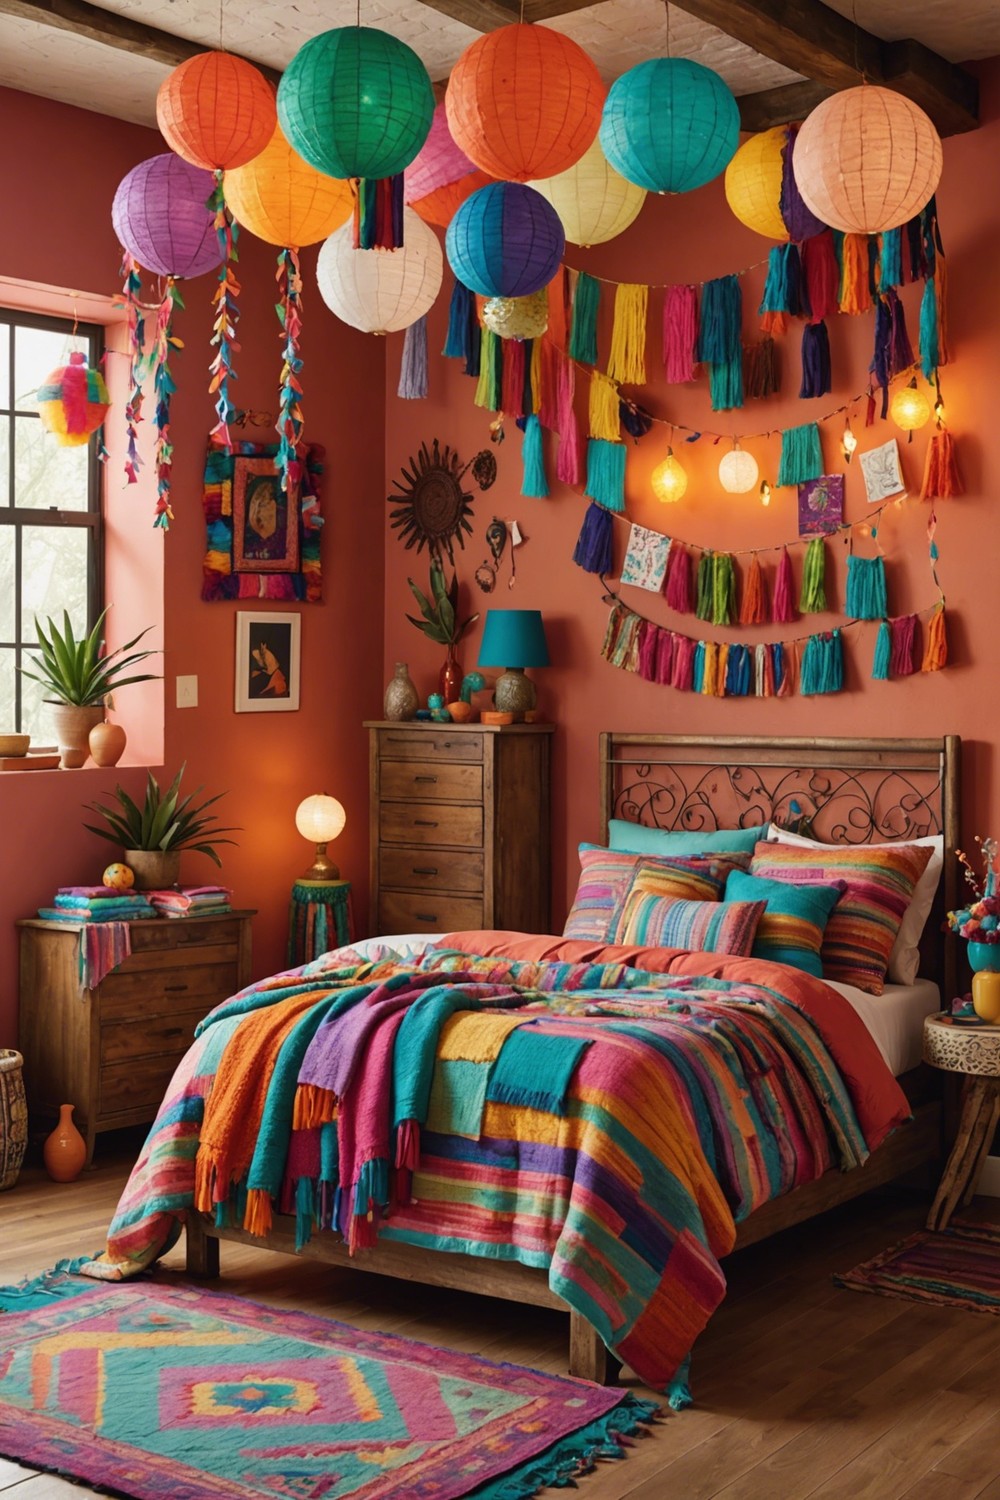 South American Fiesta: Hanging Colorful Piñata Lights above a Vibrant Bed